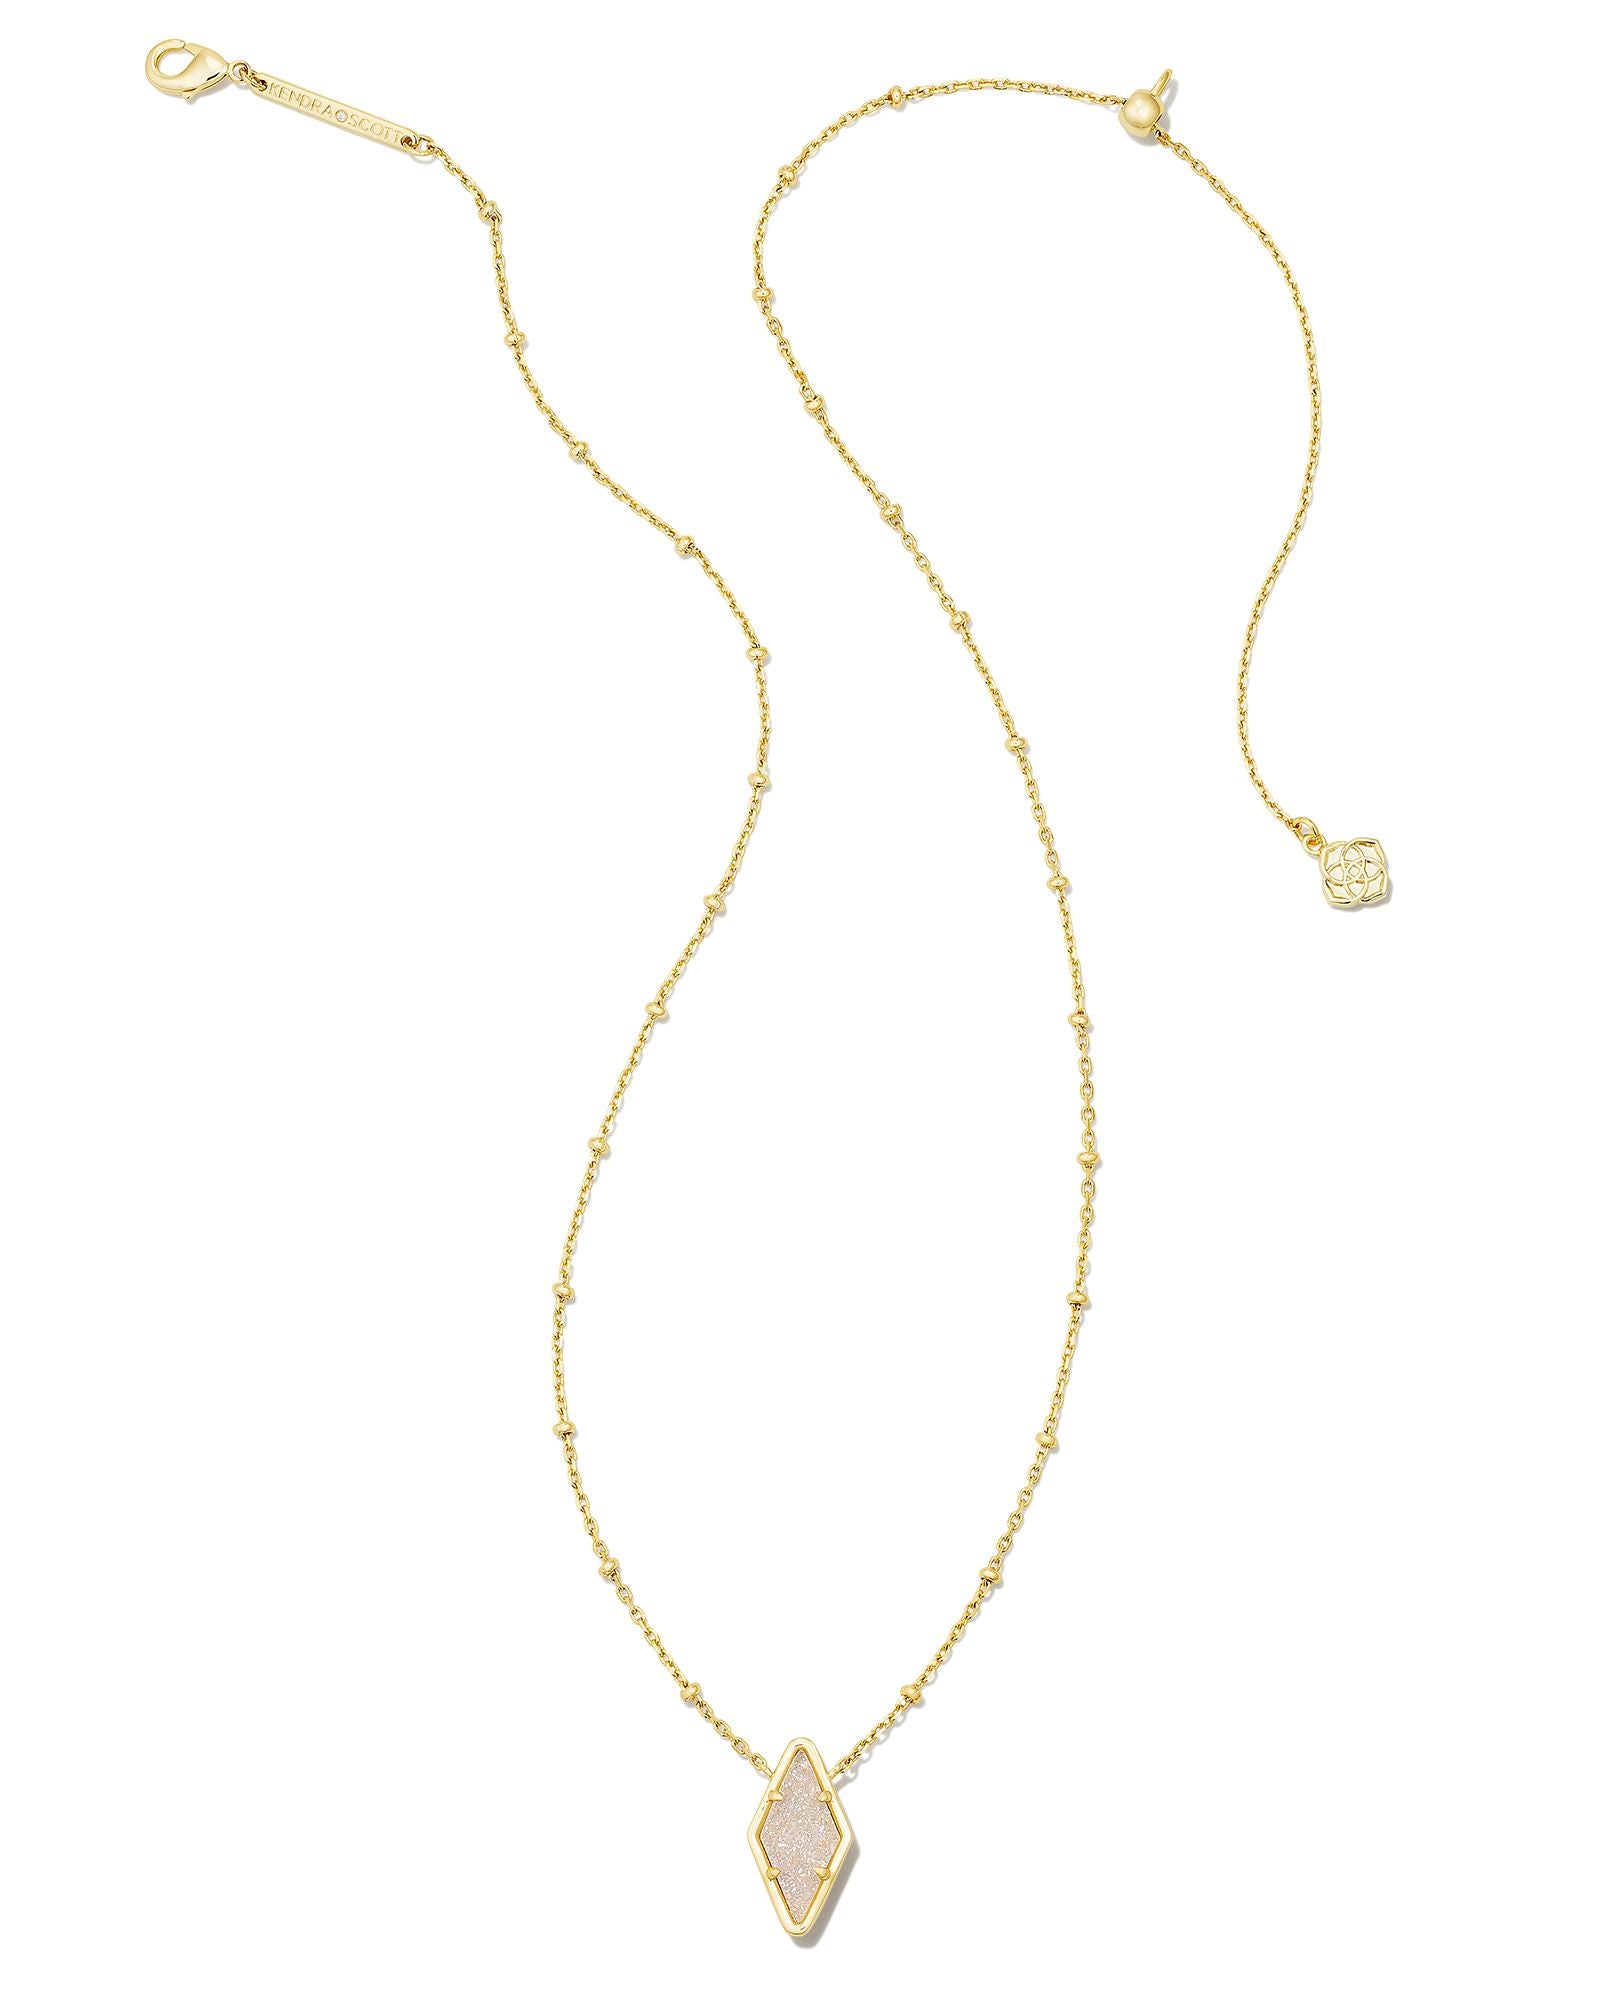 Kendra Scott | Kinsley Gold Short Pendant Necklace in Iridescent Drusy - Giddy Up Glamour Boutique